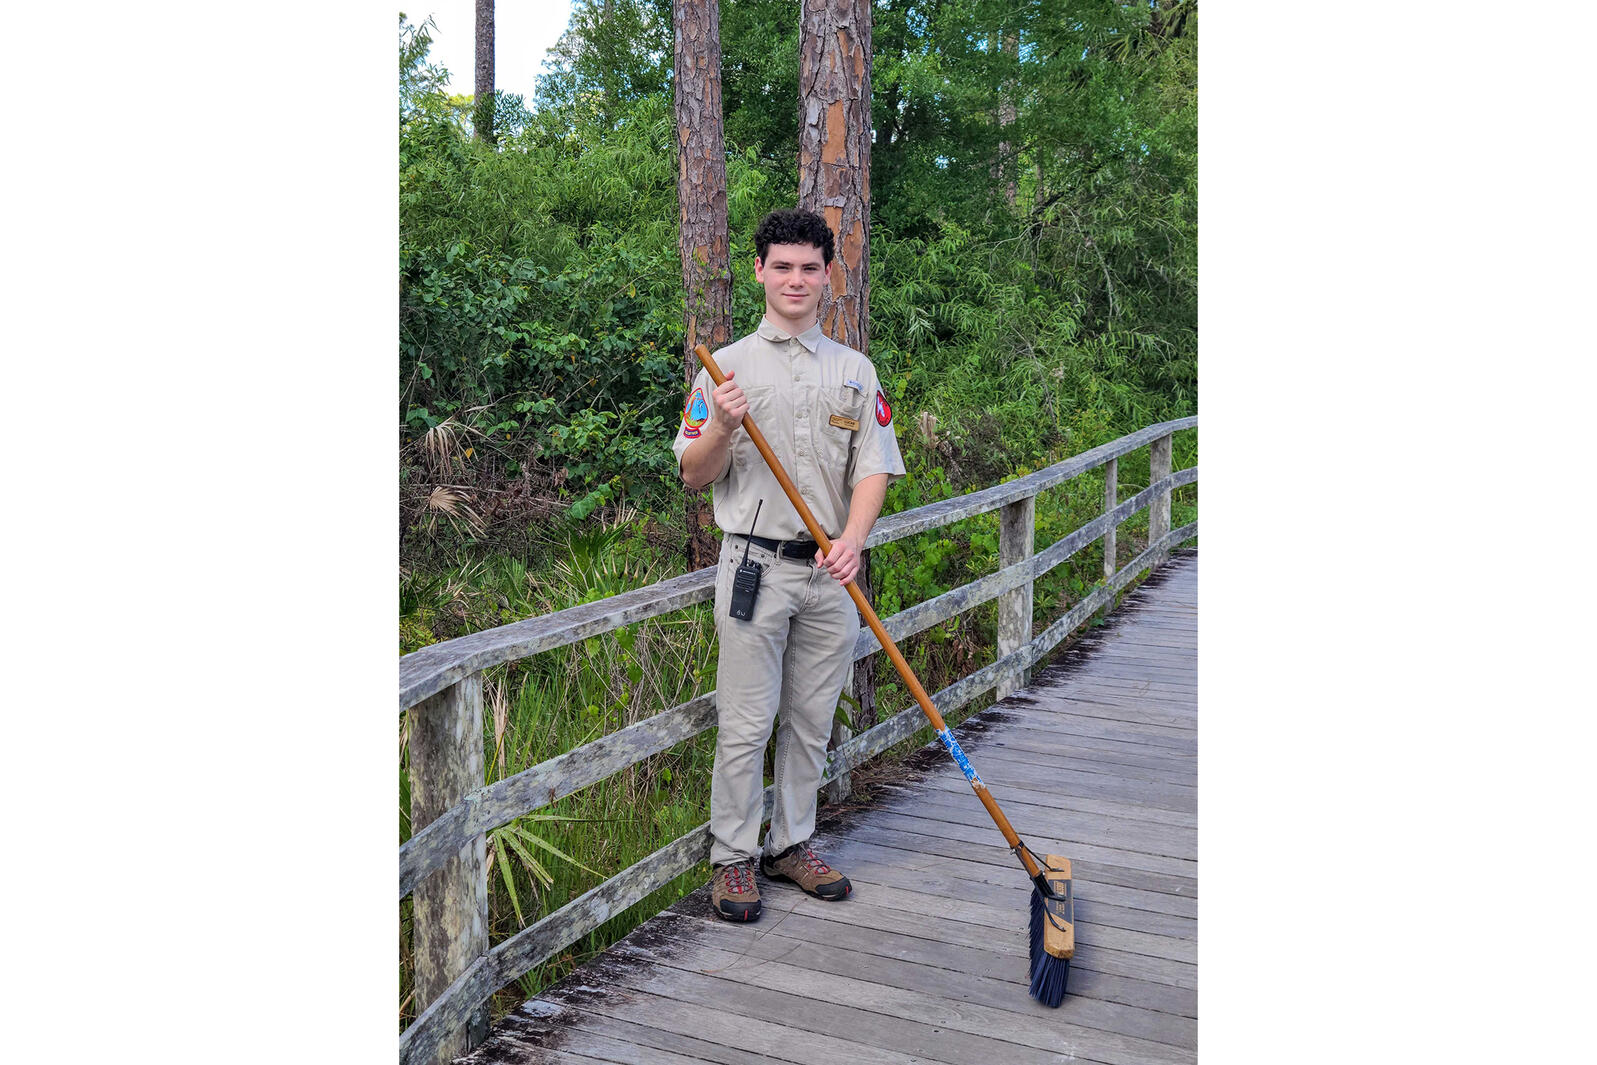 A young man wearing a uniform holds a broom on a boardwalk.